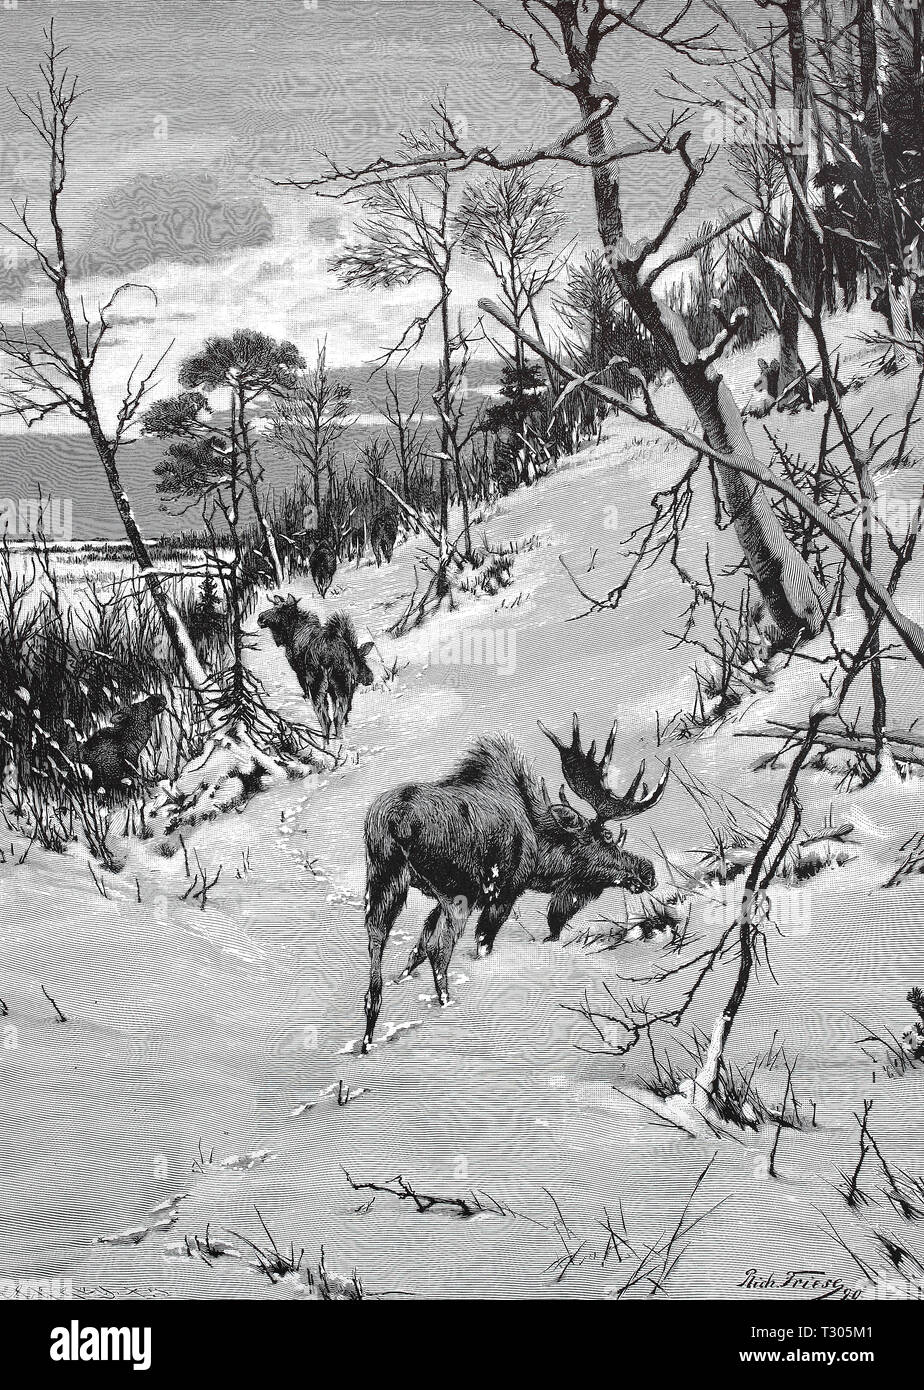 Digital improved reproduction, Moving elks in the snow-covered wood in Norway, Ziehende Elche im verschneiten Wald in Norwegen, from an original print from the 19th century Stock Photo